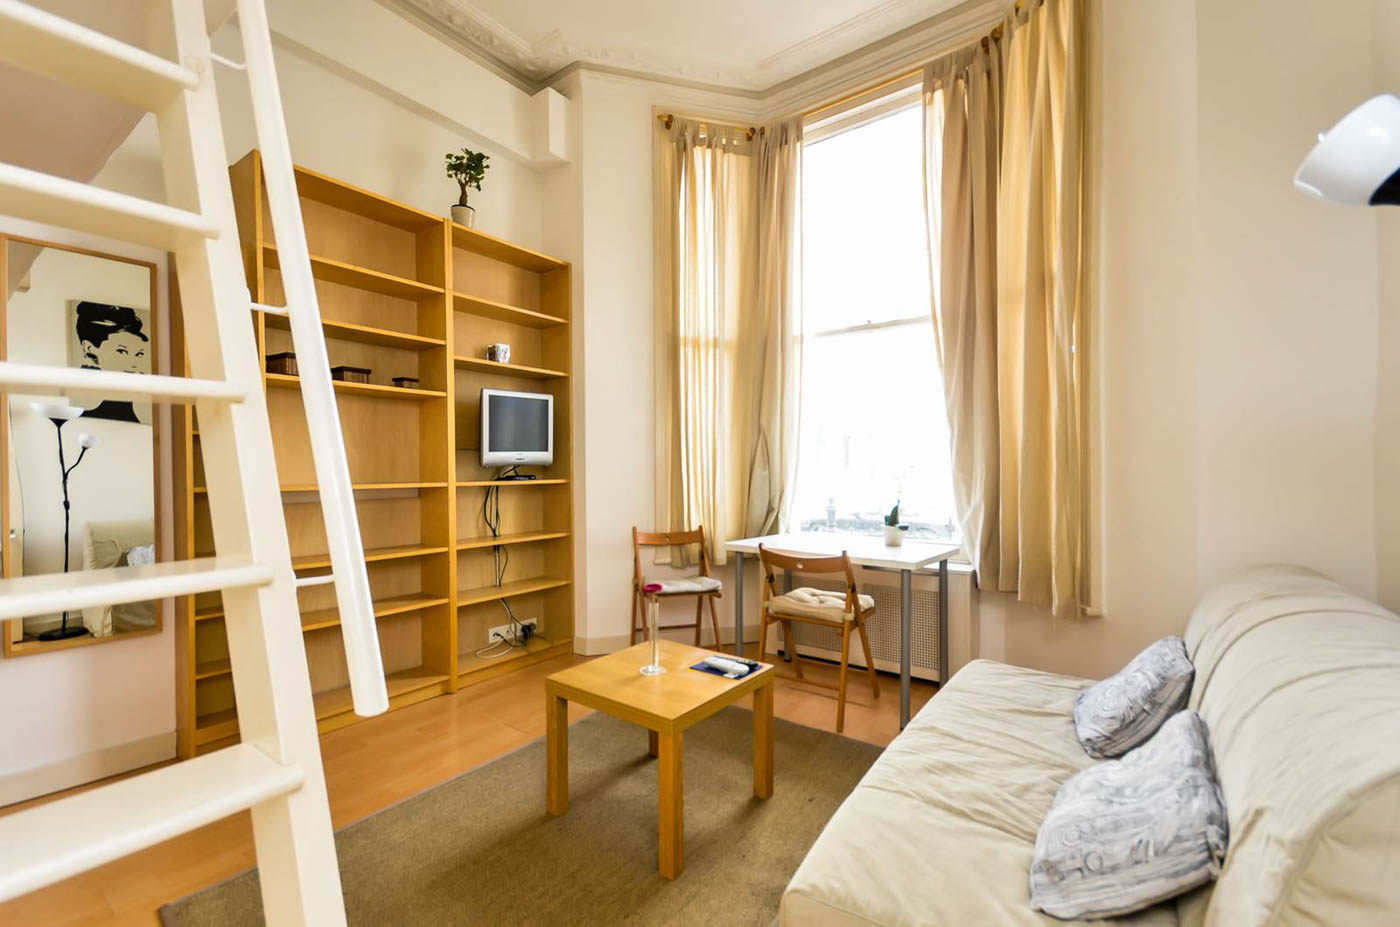 Private student accommodation near Imperial College